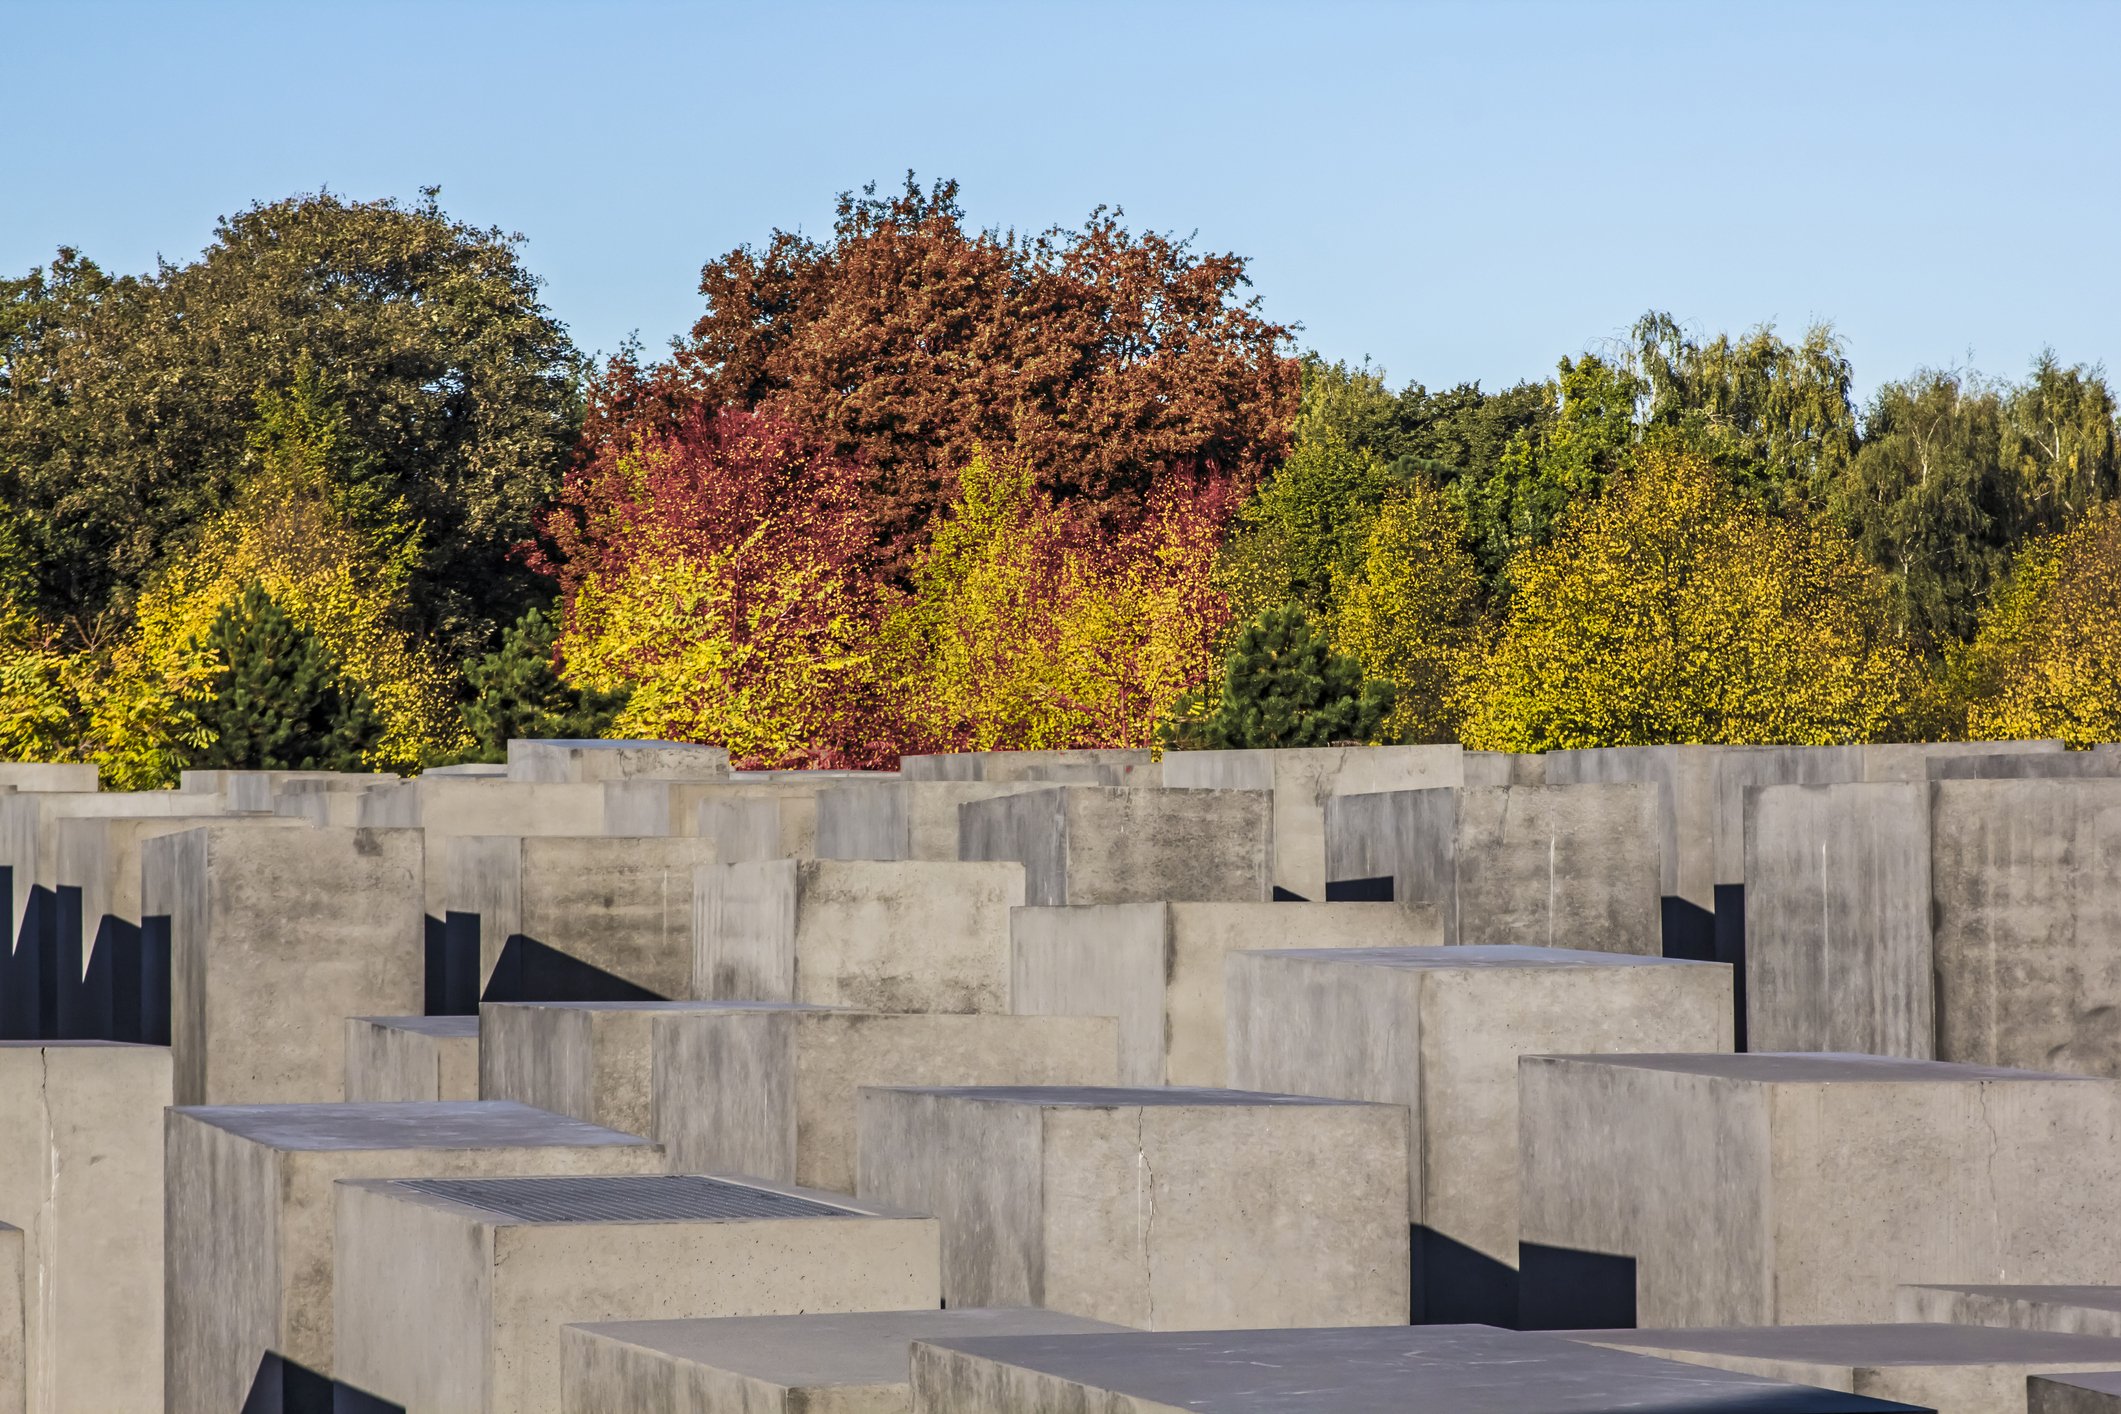 The Memorial to the Murdered Jews of Europe, also known as the Holocaust Memorial | Photo: Getty Images